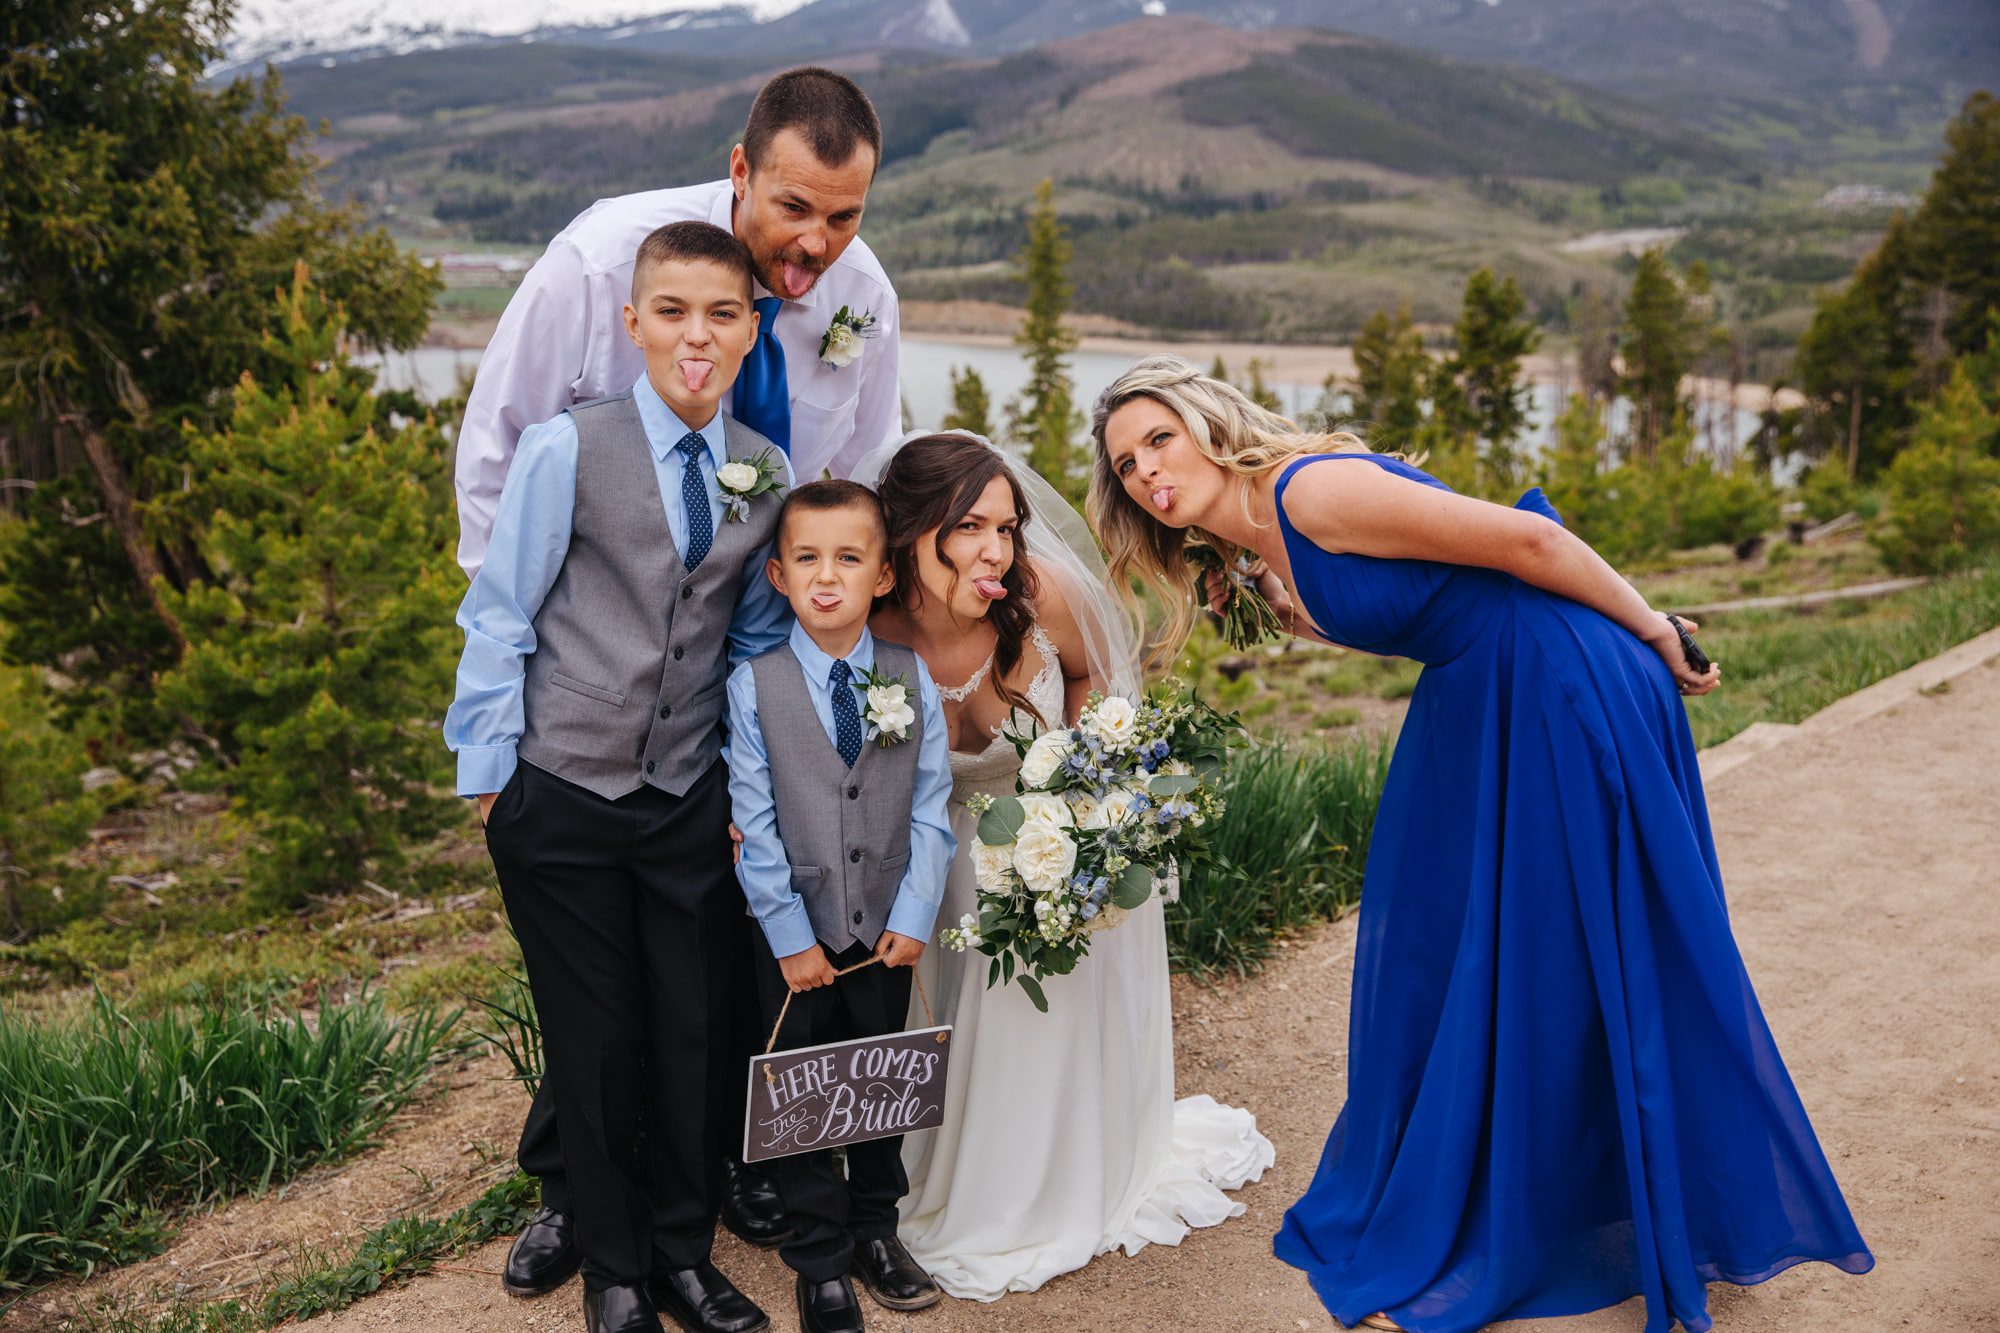 sapphire point, sapphire point wedding, frisco wedding, frisco wedding photographer, mountain wedding, outdoor wedding, scenic wedding, intimate wedding, funny family photos at wedding